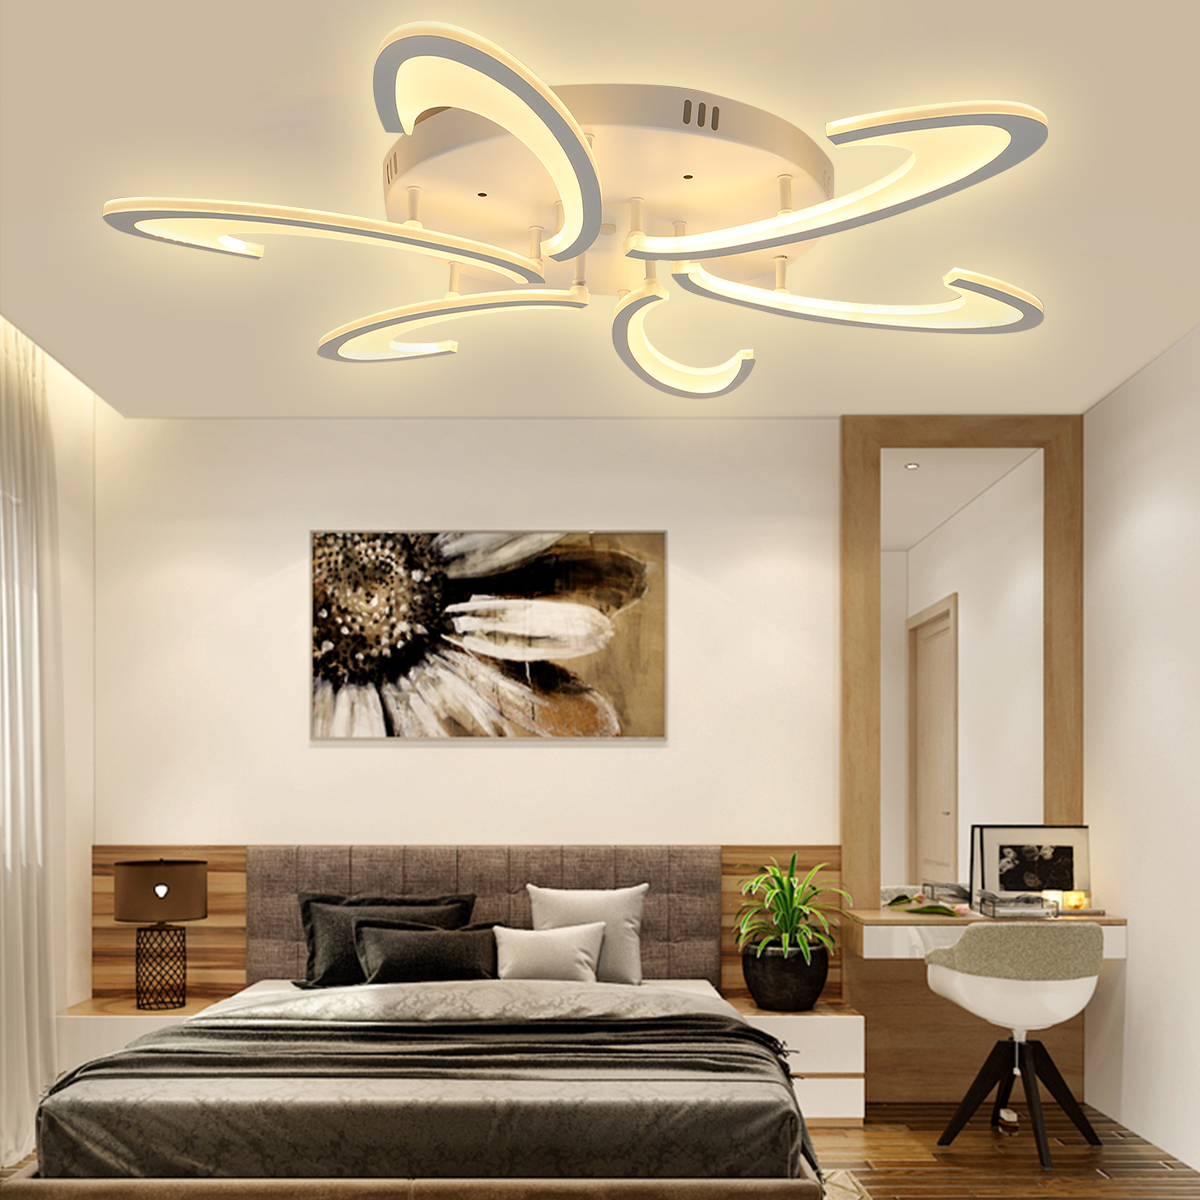 6-Heads-Modern-LED-Acrylic-Ceiling-Lamp-Pendant-Light-Chandeliers-BedroomRemote-Control-1793884-3